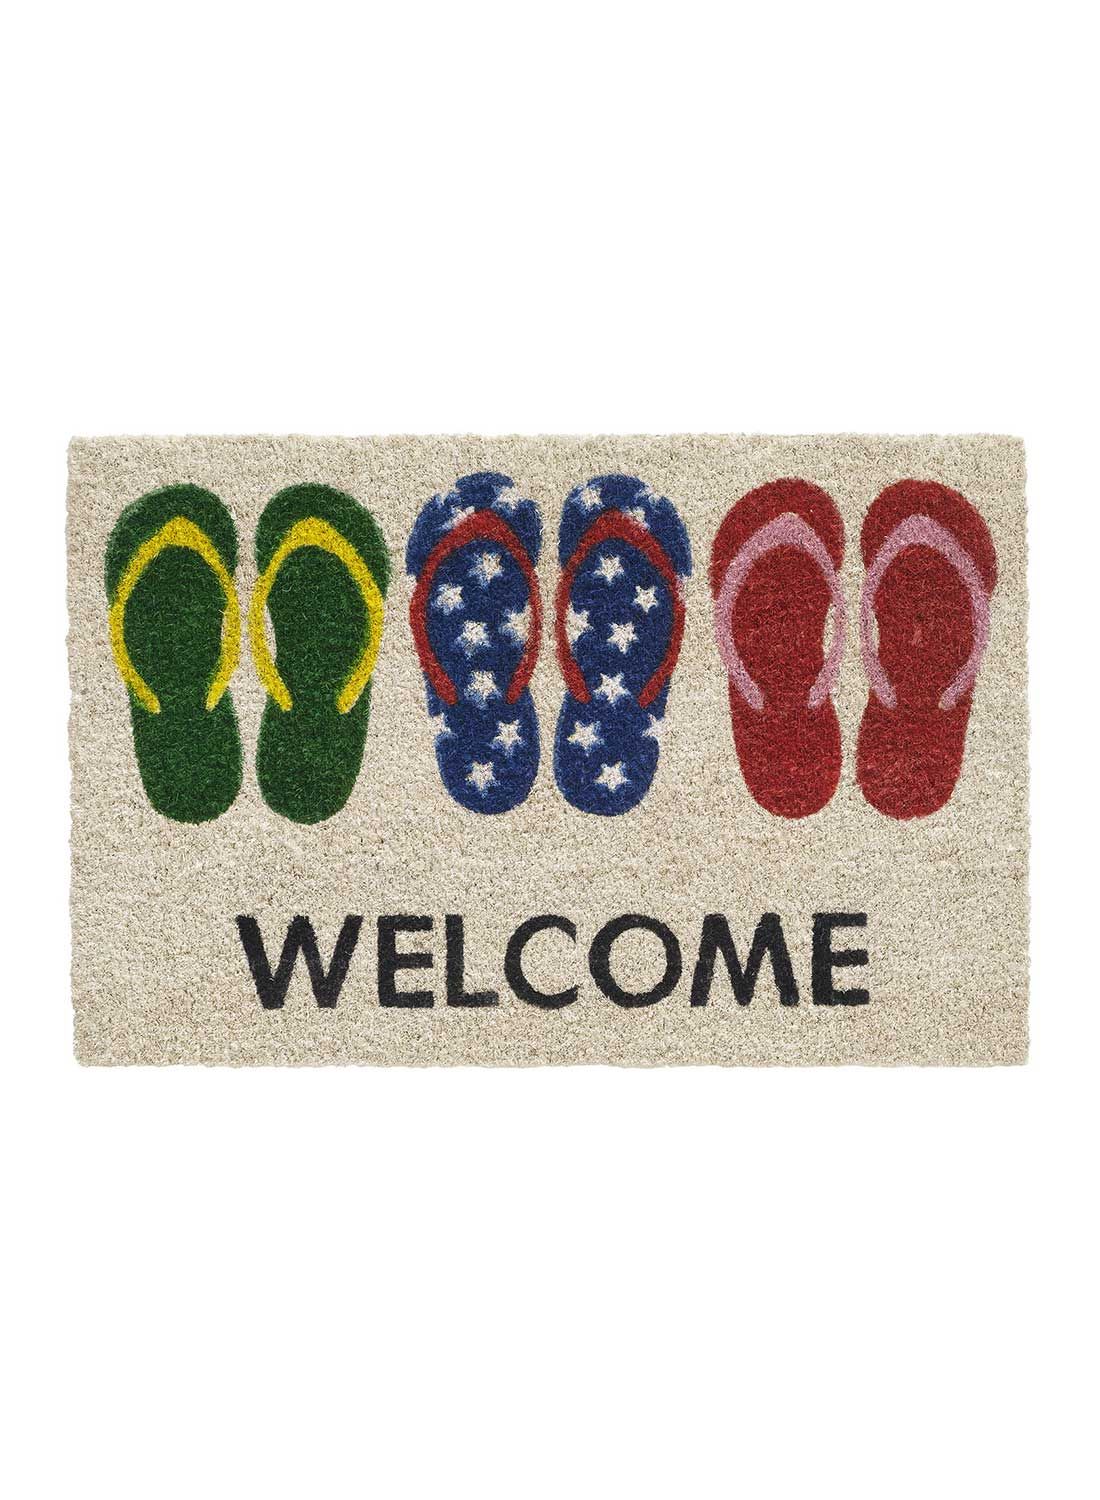 COCO WELCOME SLIPPERS